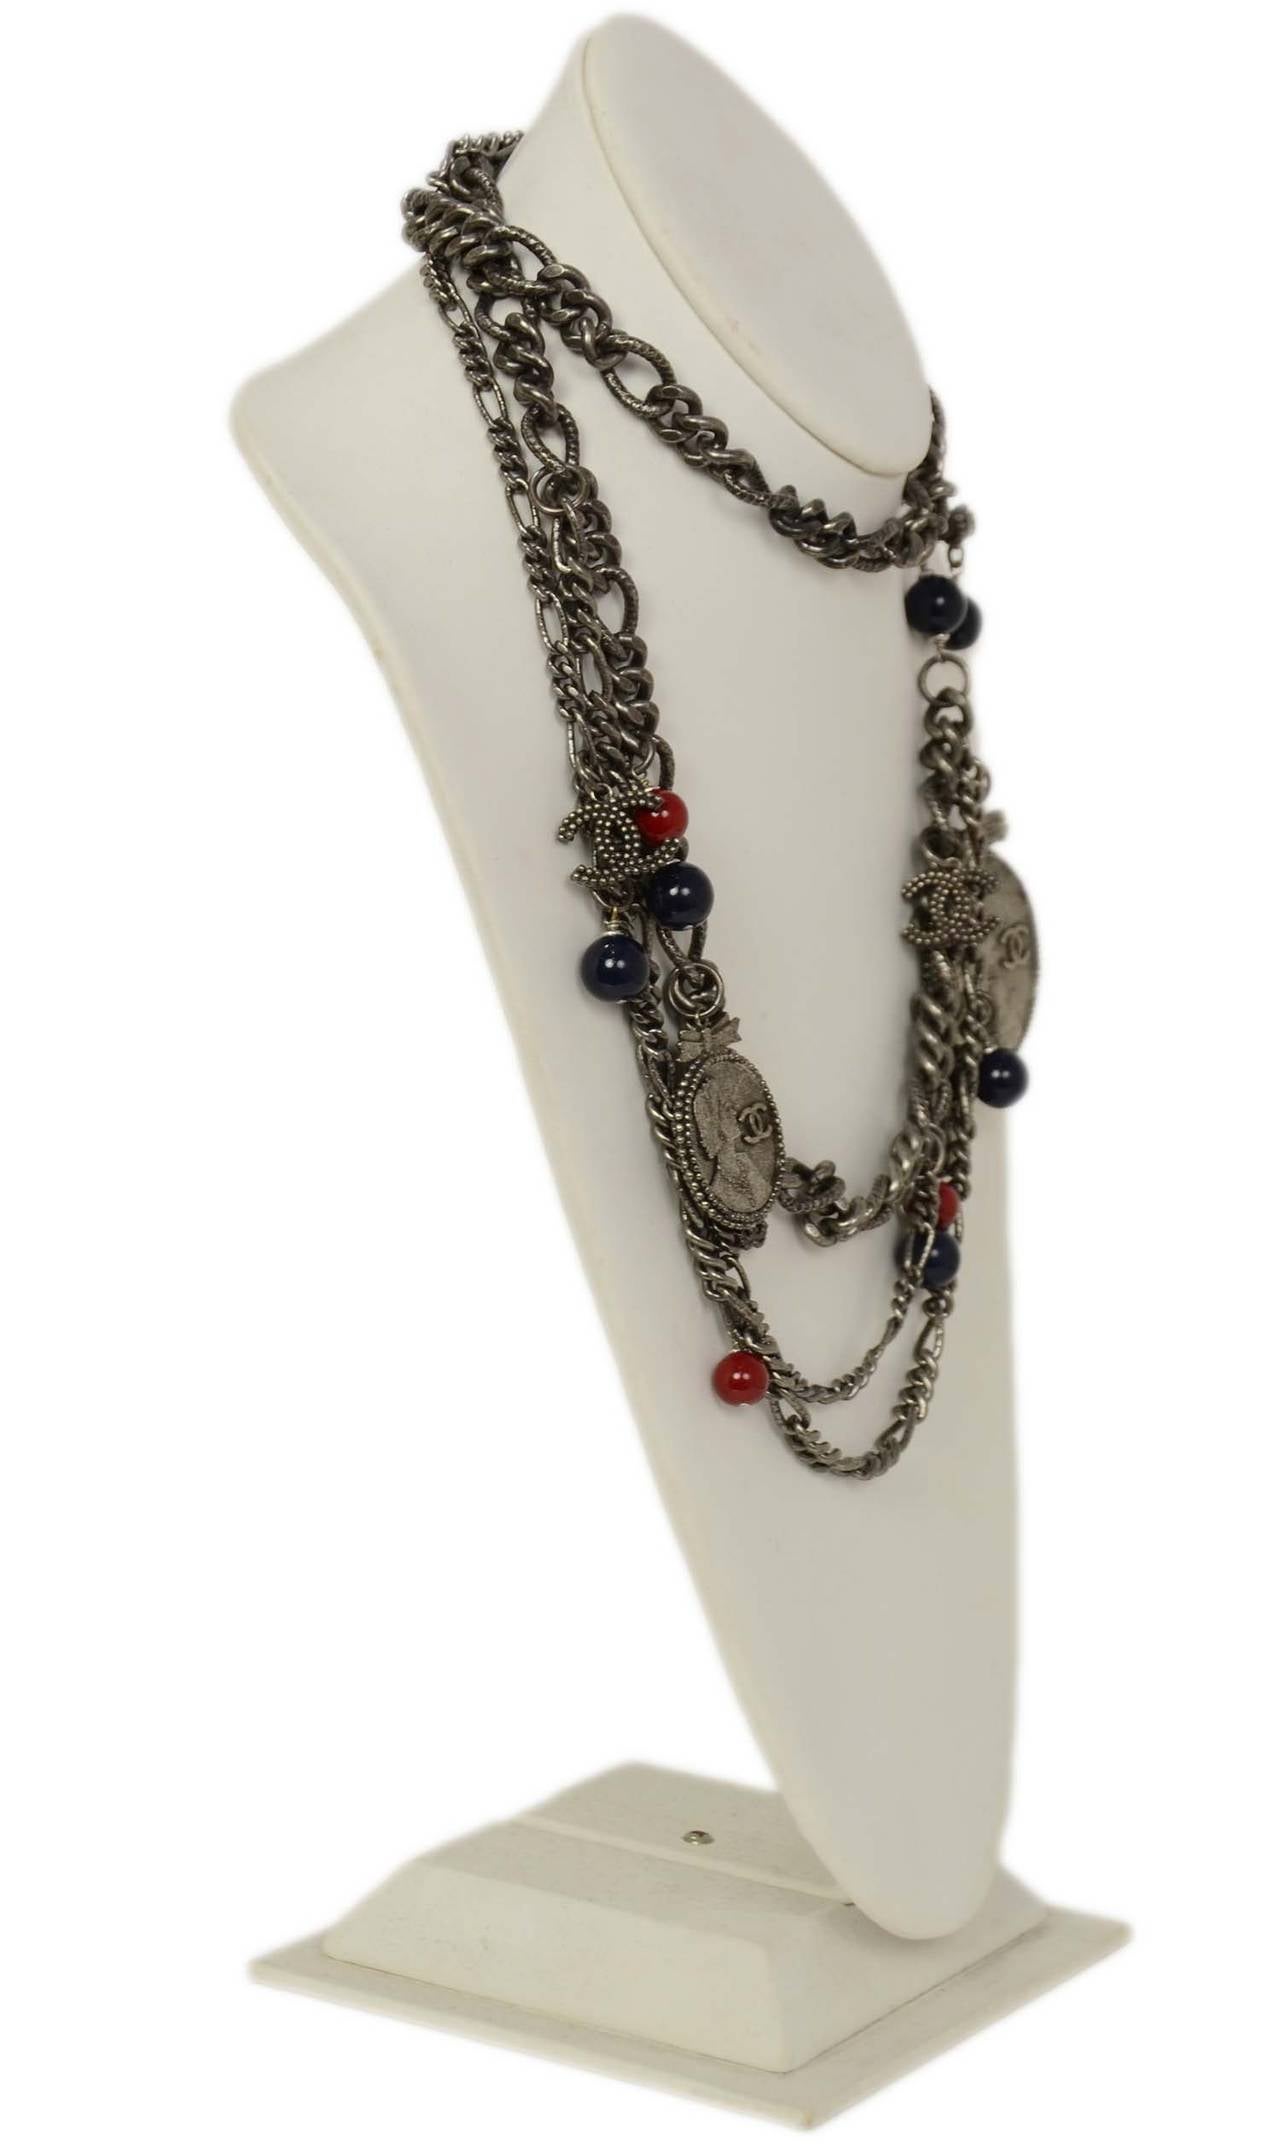 CHANEL Antiqued Silver Chain Link Belt W/ CC Cameo Charms and Red & Navy Beads
This versatile piece can be worn as a belt as well as a necklace as seen in the photos.

    Made in: France
    Year of Production: 2004
    Materials: Metal
   